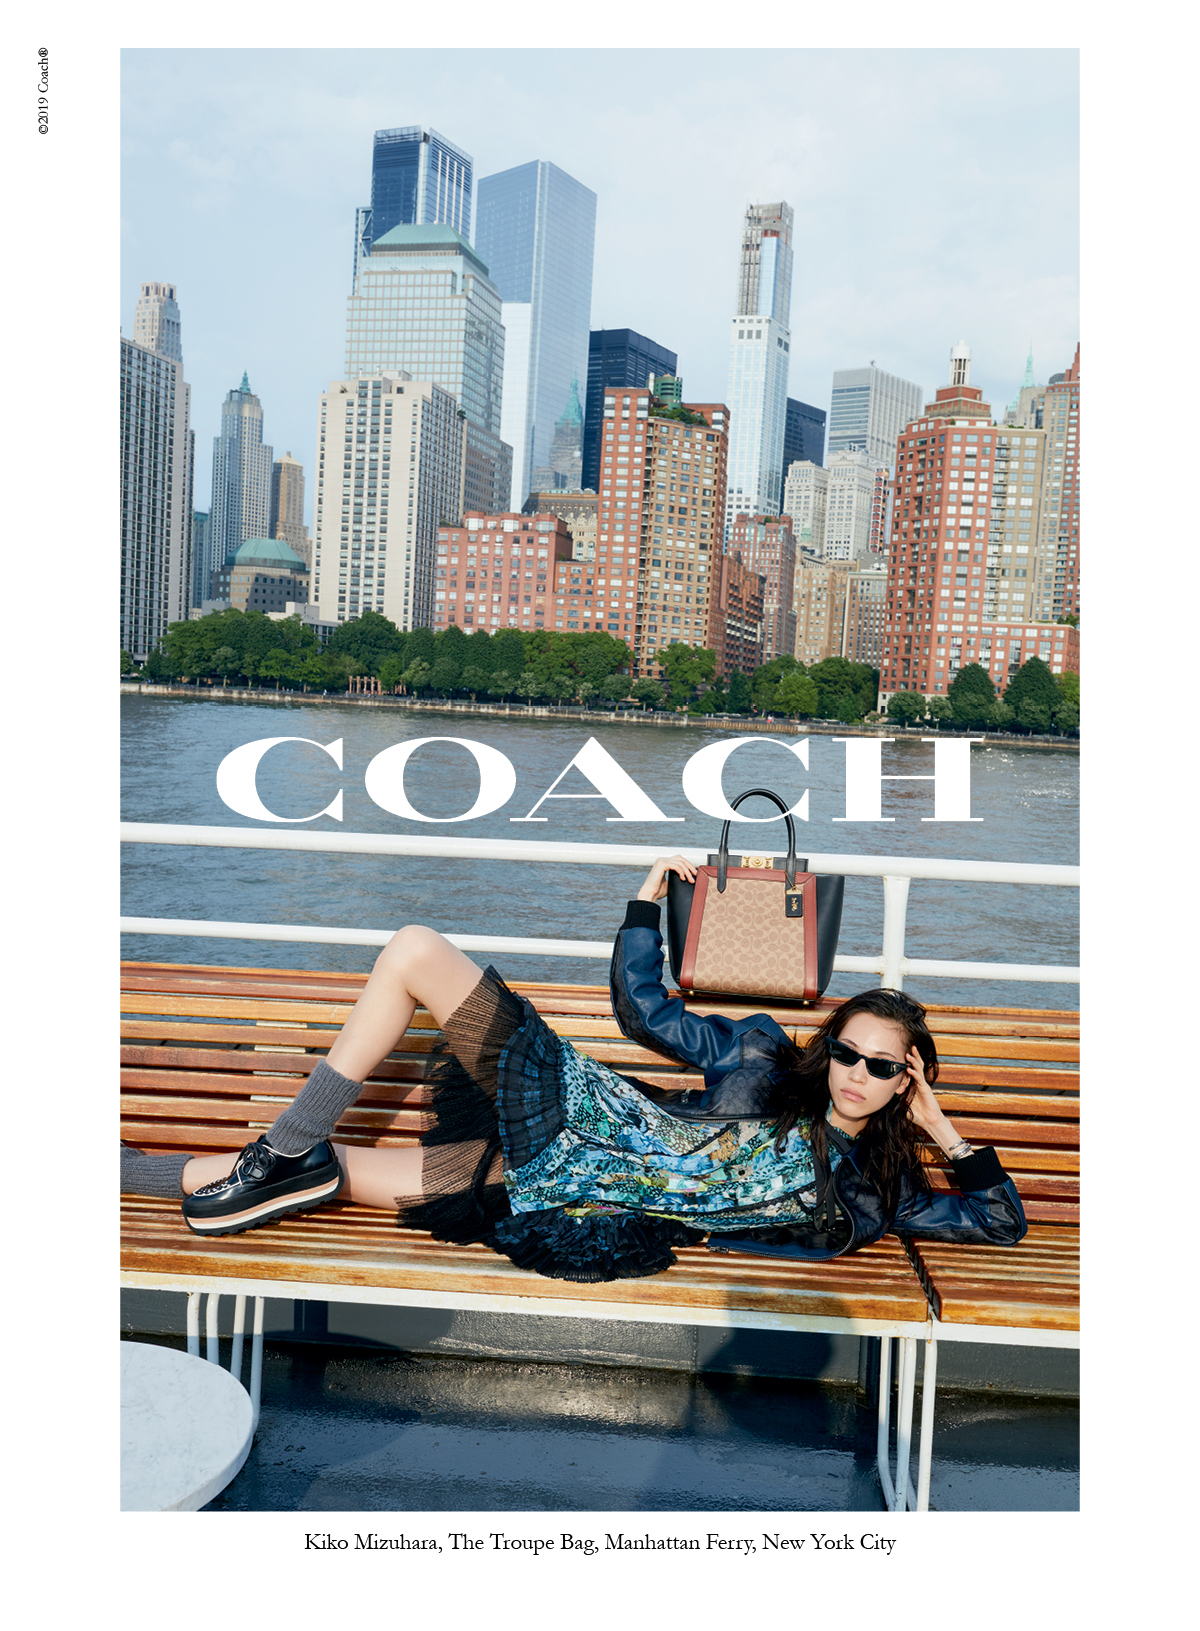 Coach owner Tapestry (TPR) Q1 2020 earnings beat